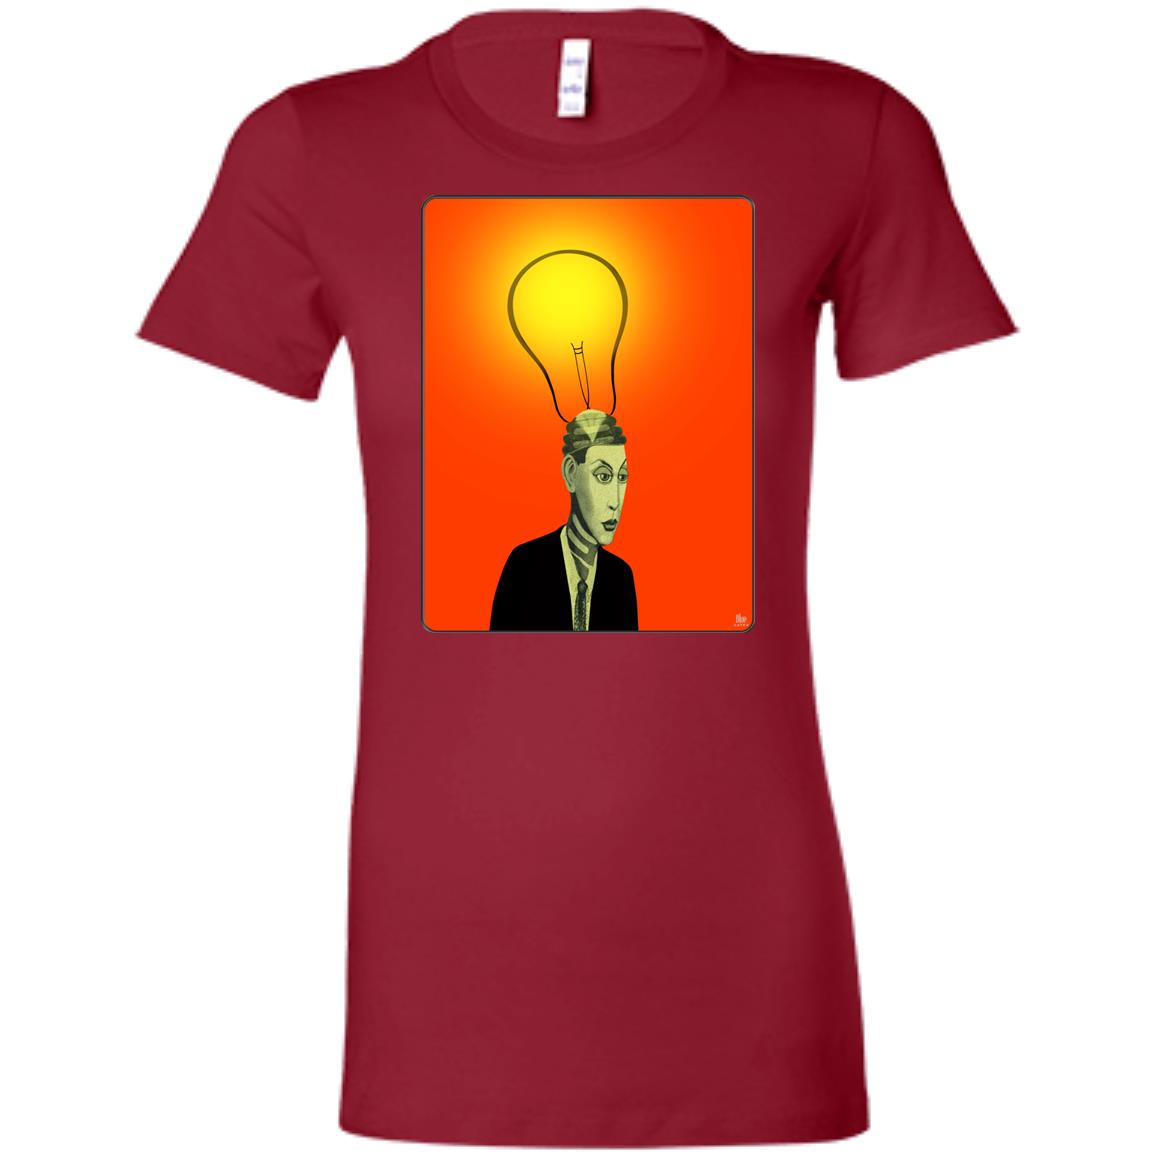 BRIGHT IDEA - Women's Fitted T-Shirt